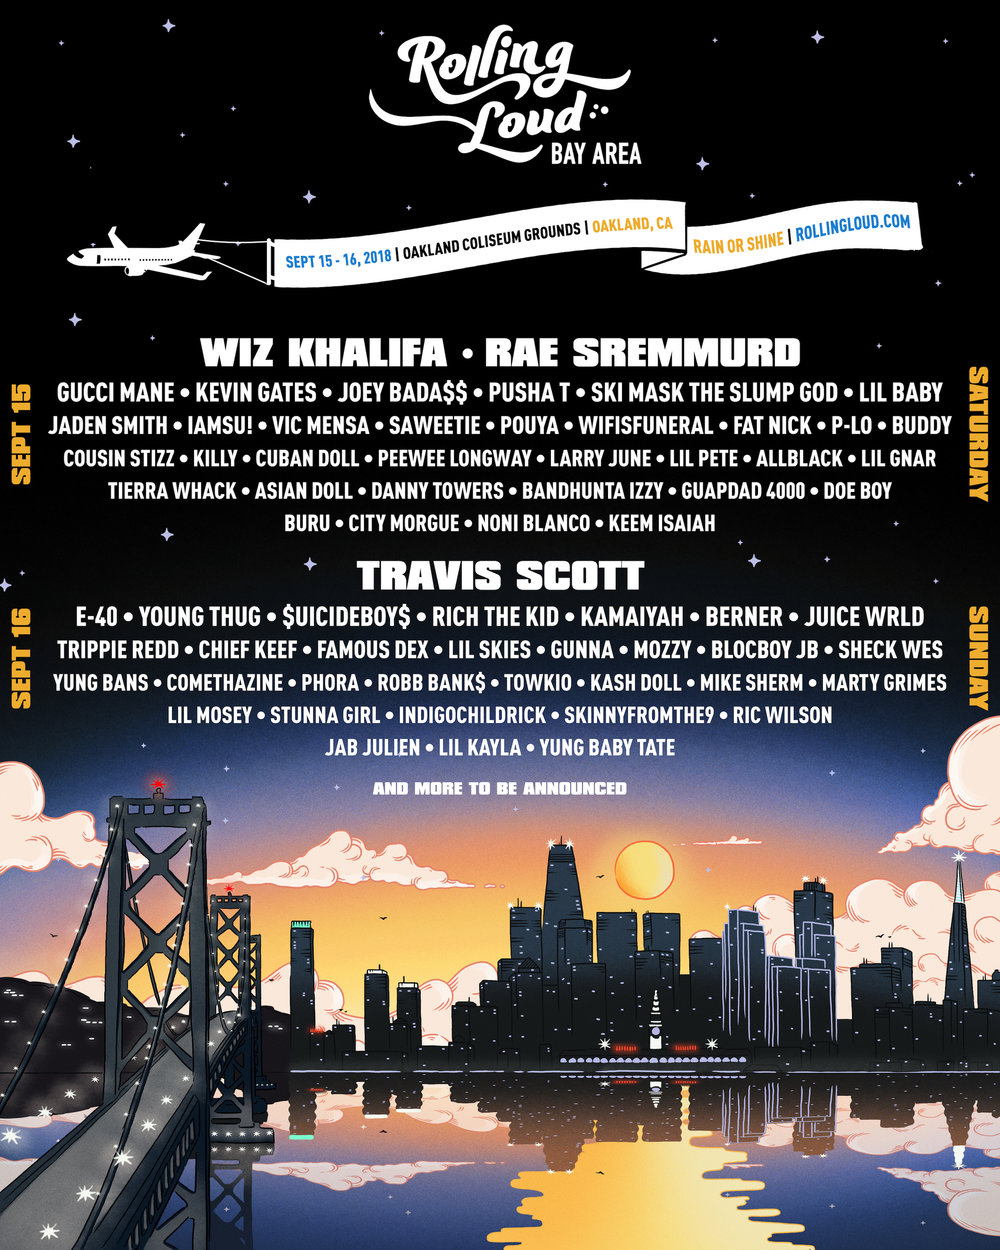 Rolling Loud Festival Announces A Deep Lineup For The Bay Area Show